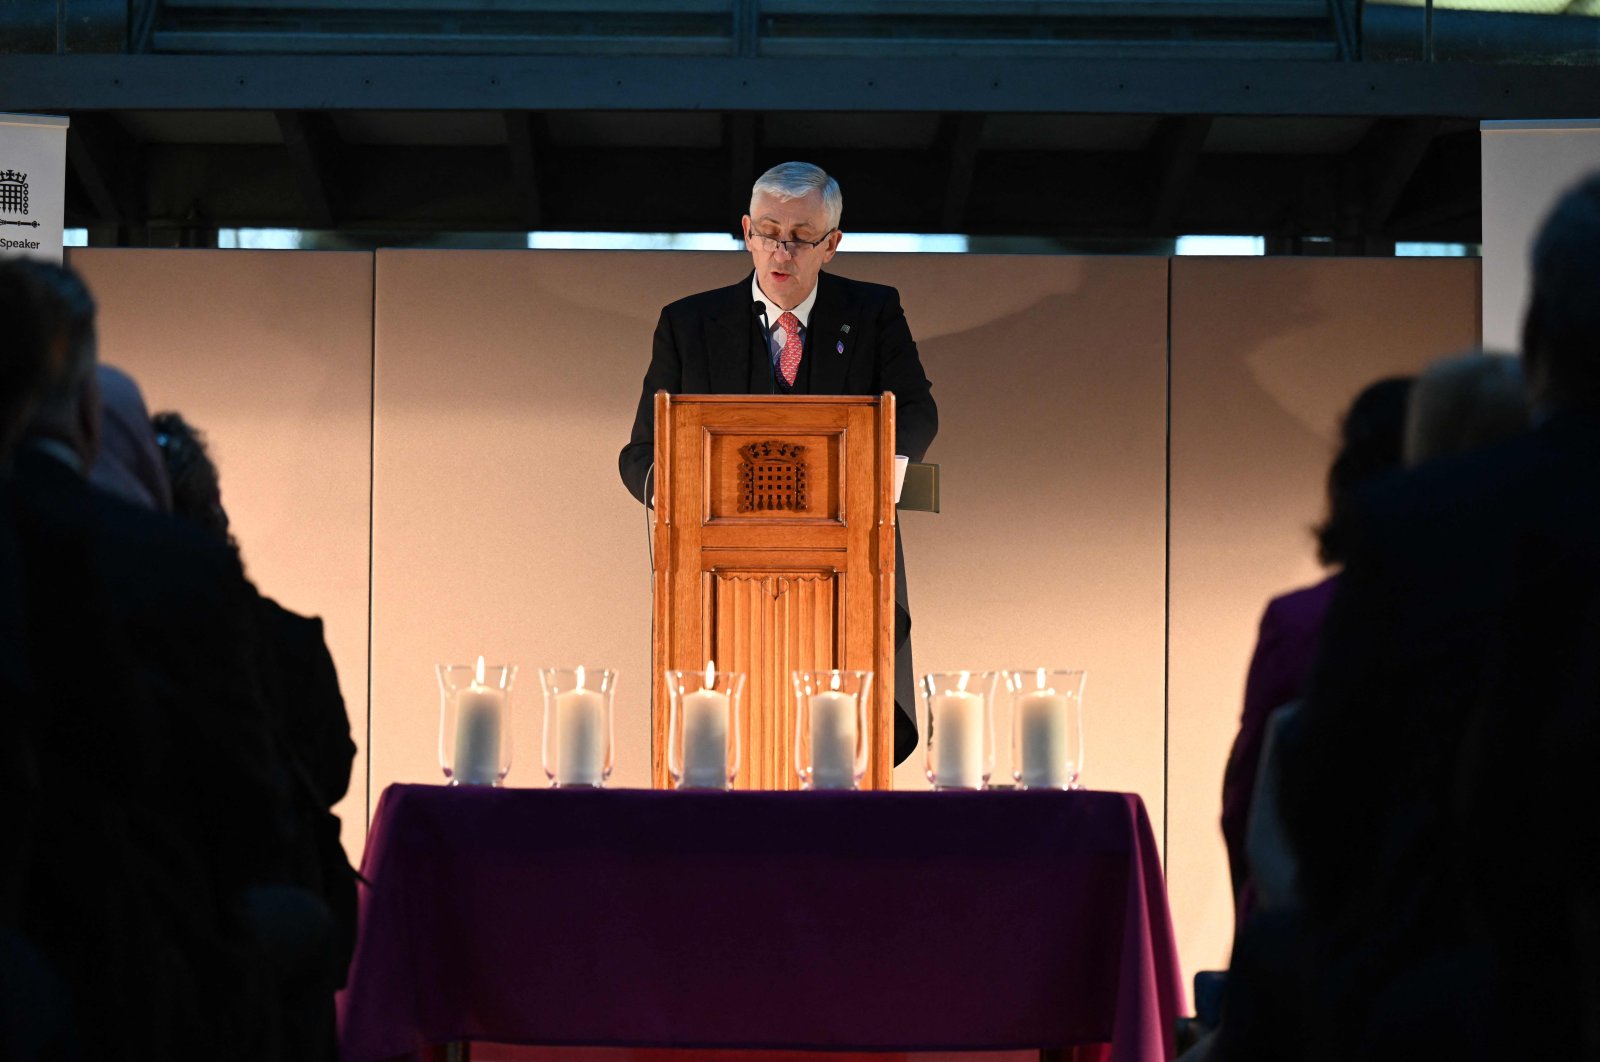 A handout photograph released by the U.K. Parliament shows Speaker of the House of Commons Lindsay Hoyle speaking at a commemoration for Holocaust Memorial Day in the House of Commons in London on Jan. 27, 2022. (AFP File Photo)